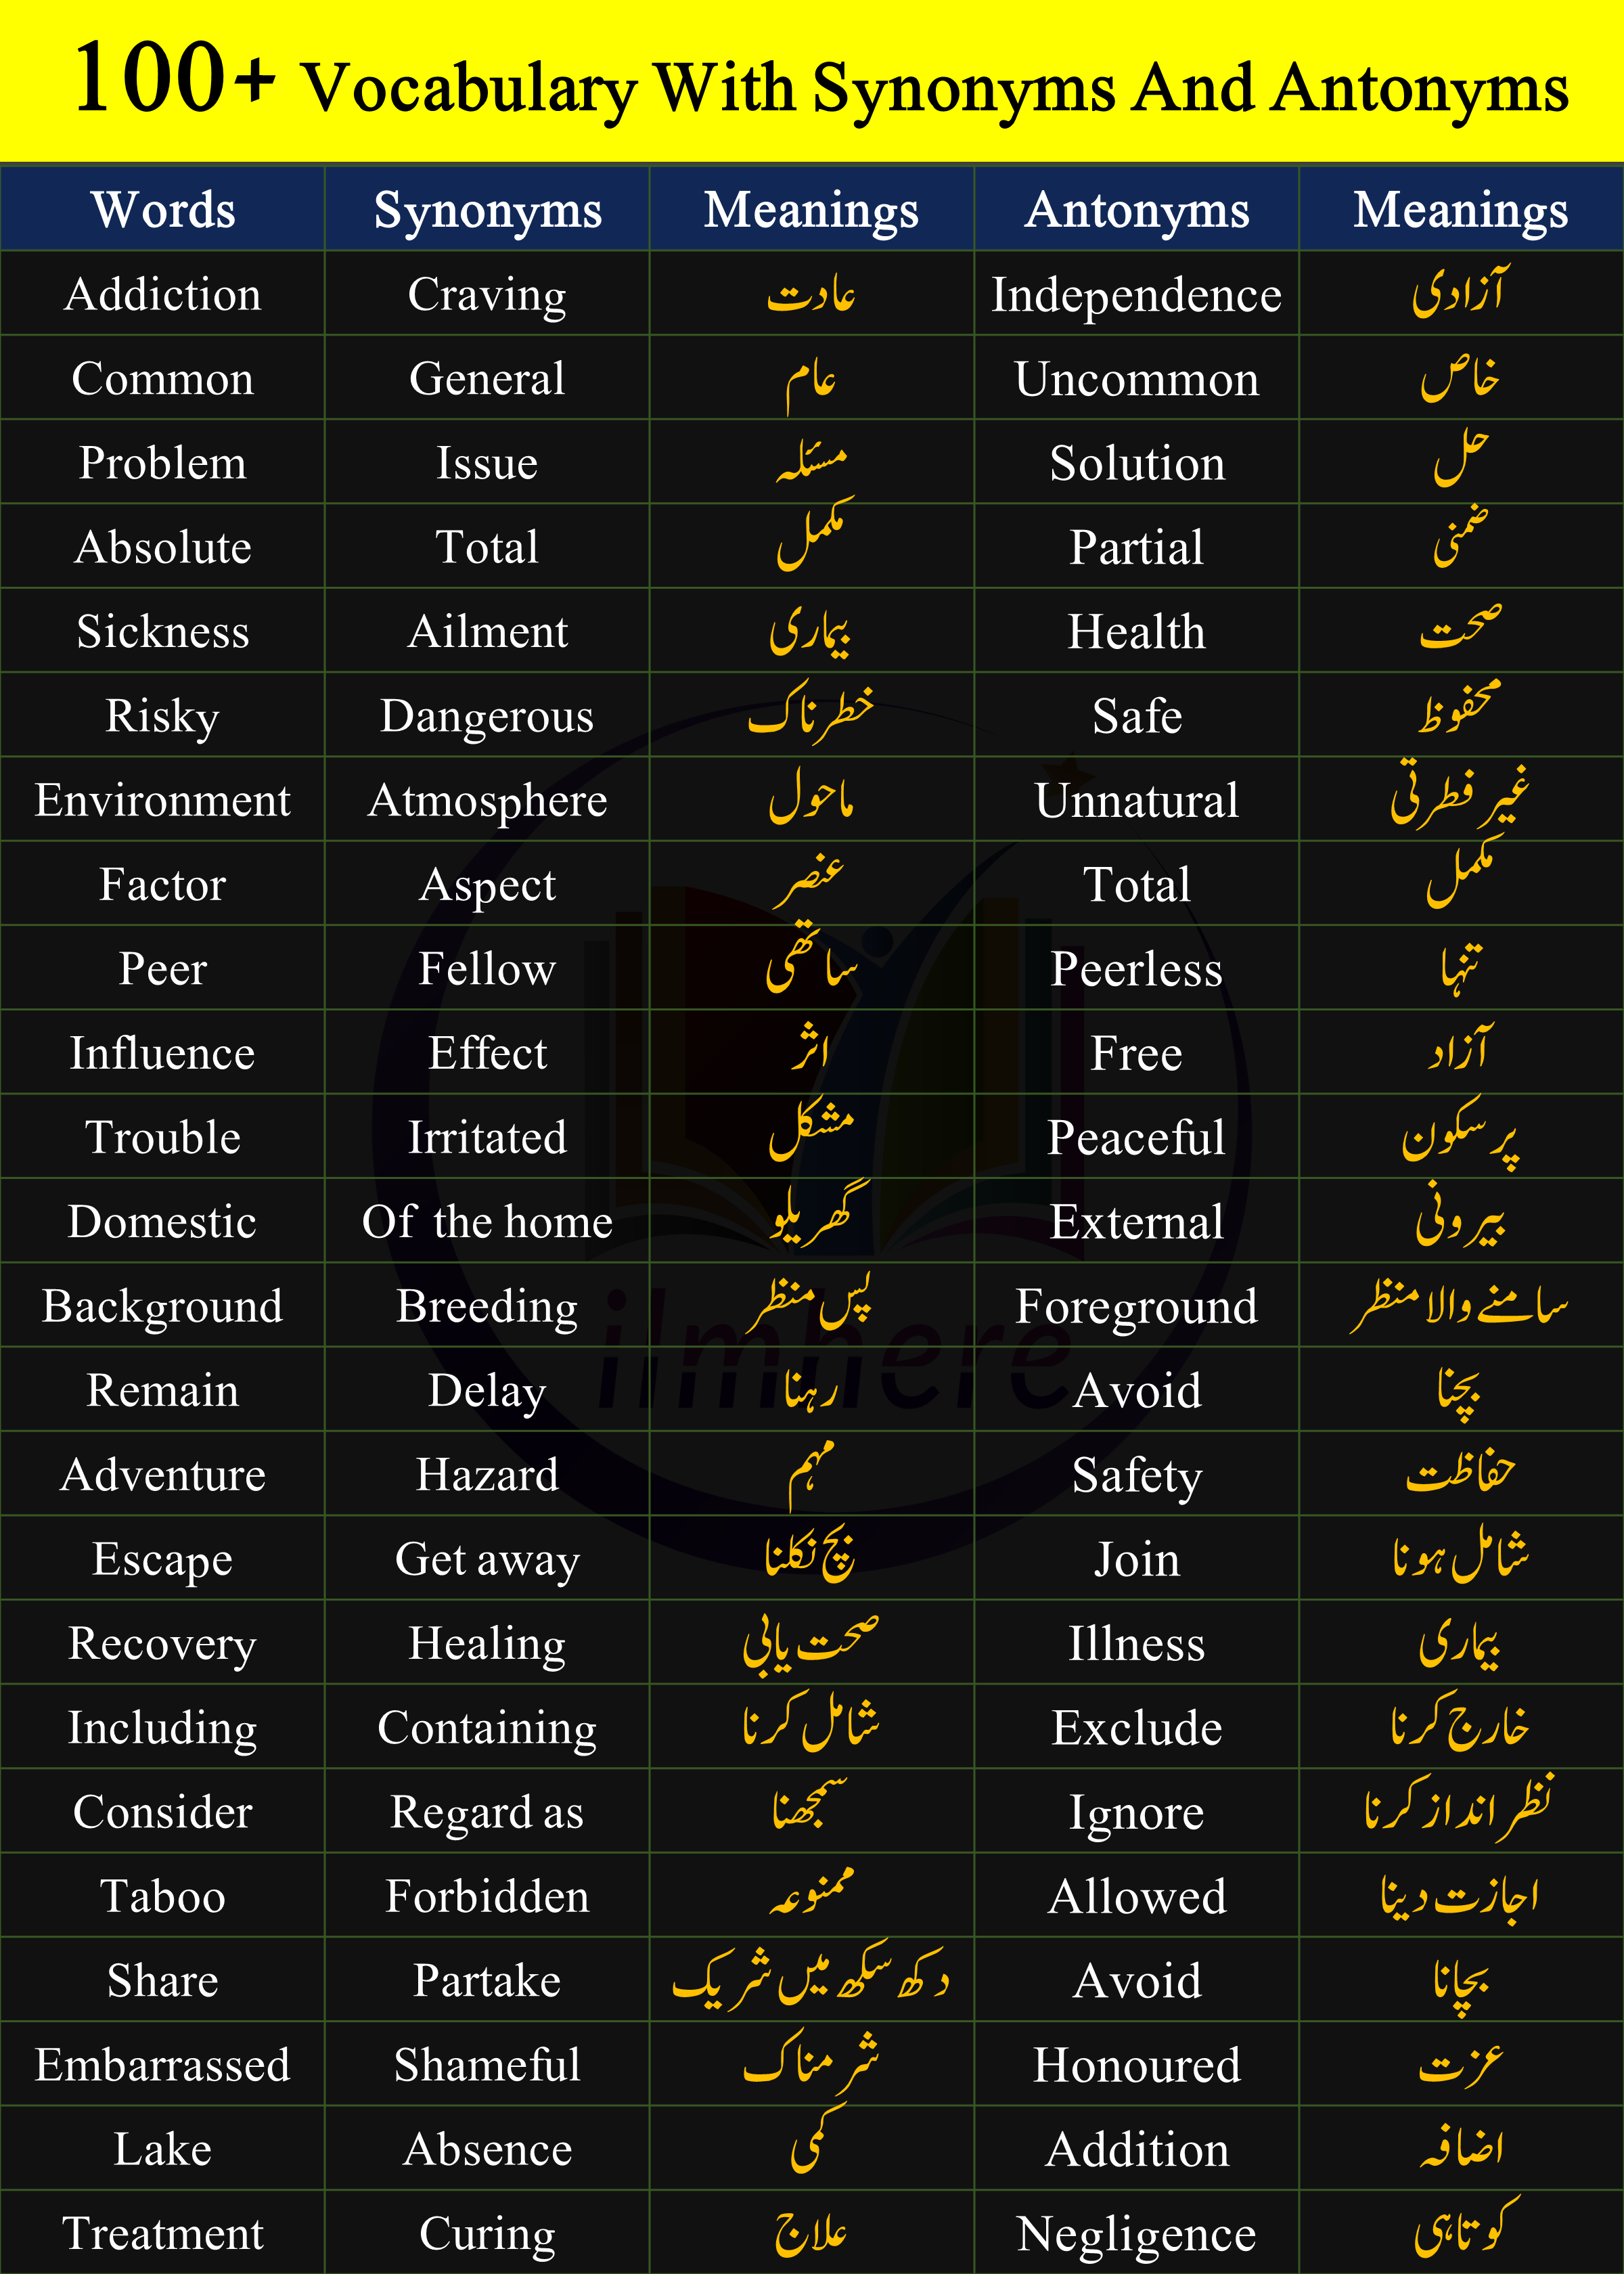 100+ Antonyms and Synonyms Meaning in Urdu